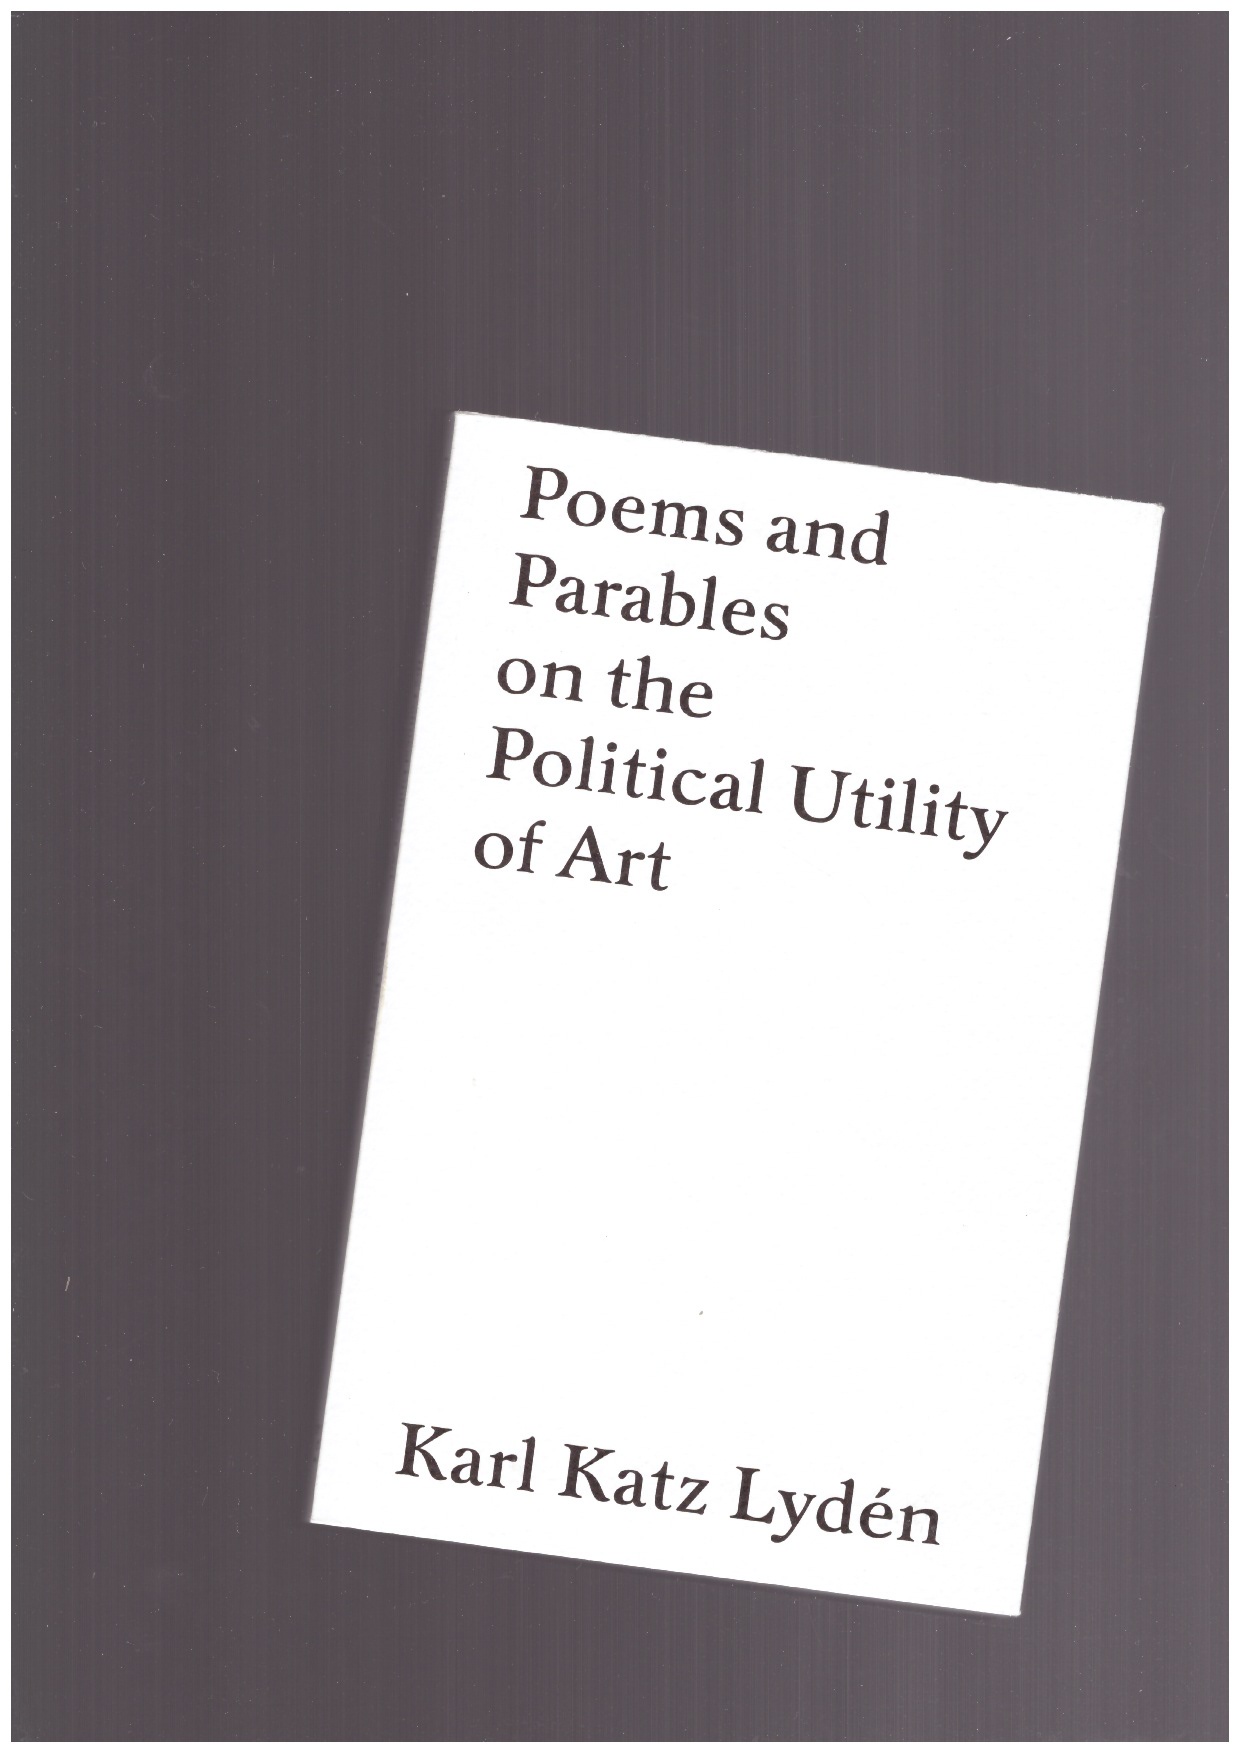 KATZ LYDÉN, Karl - Poems and Parables on the Political Utility of Art